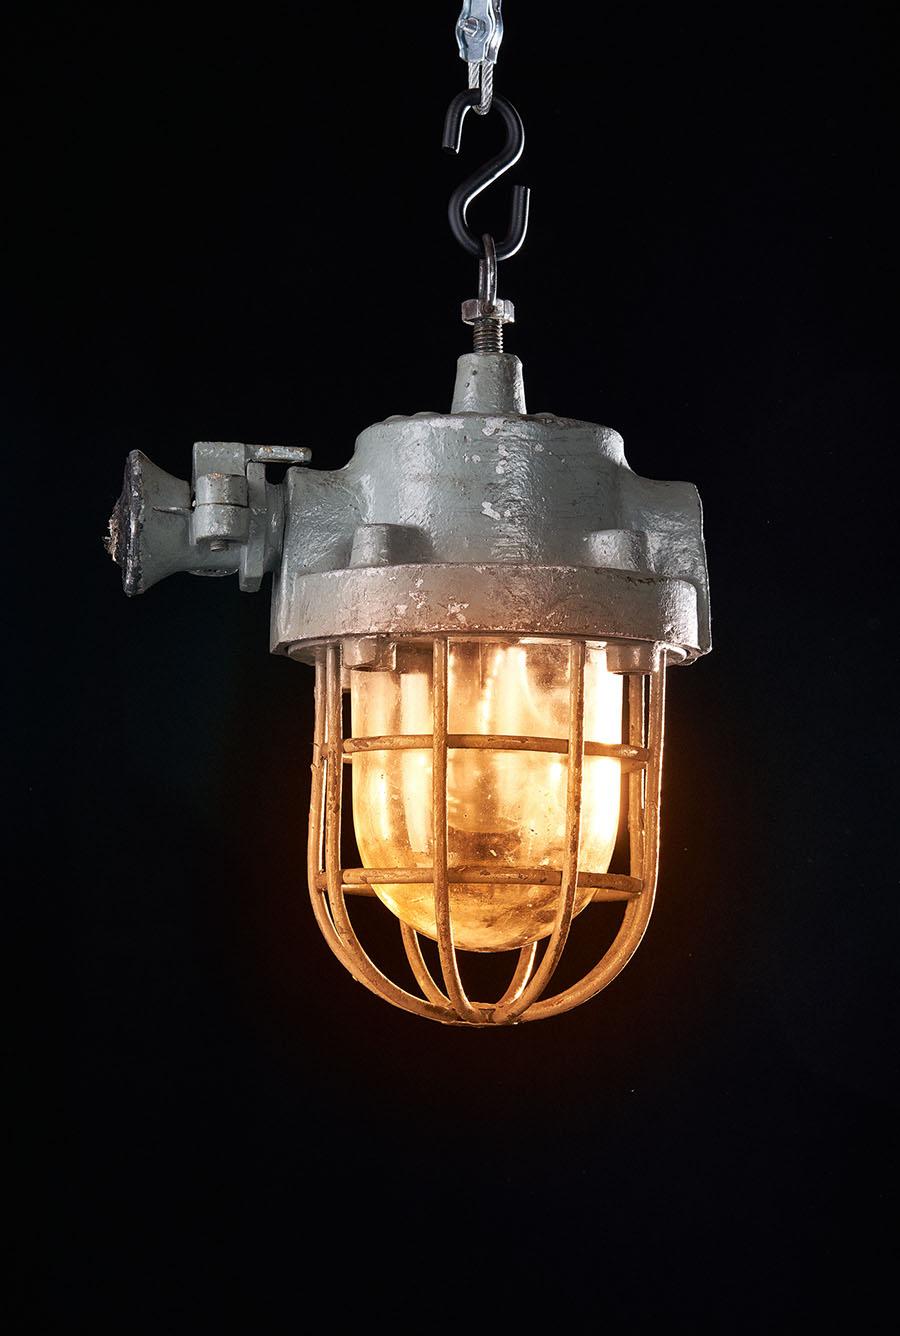 Primary use
Mining explosion-proof luminaire for flameproof construction.
Explosion-proof luminaires were designed to illuminate gas decks of methane gas mines and other surfaces and rooms with a risk of explosion 